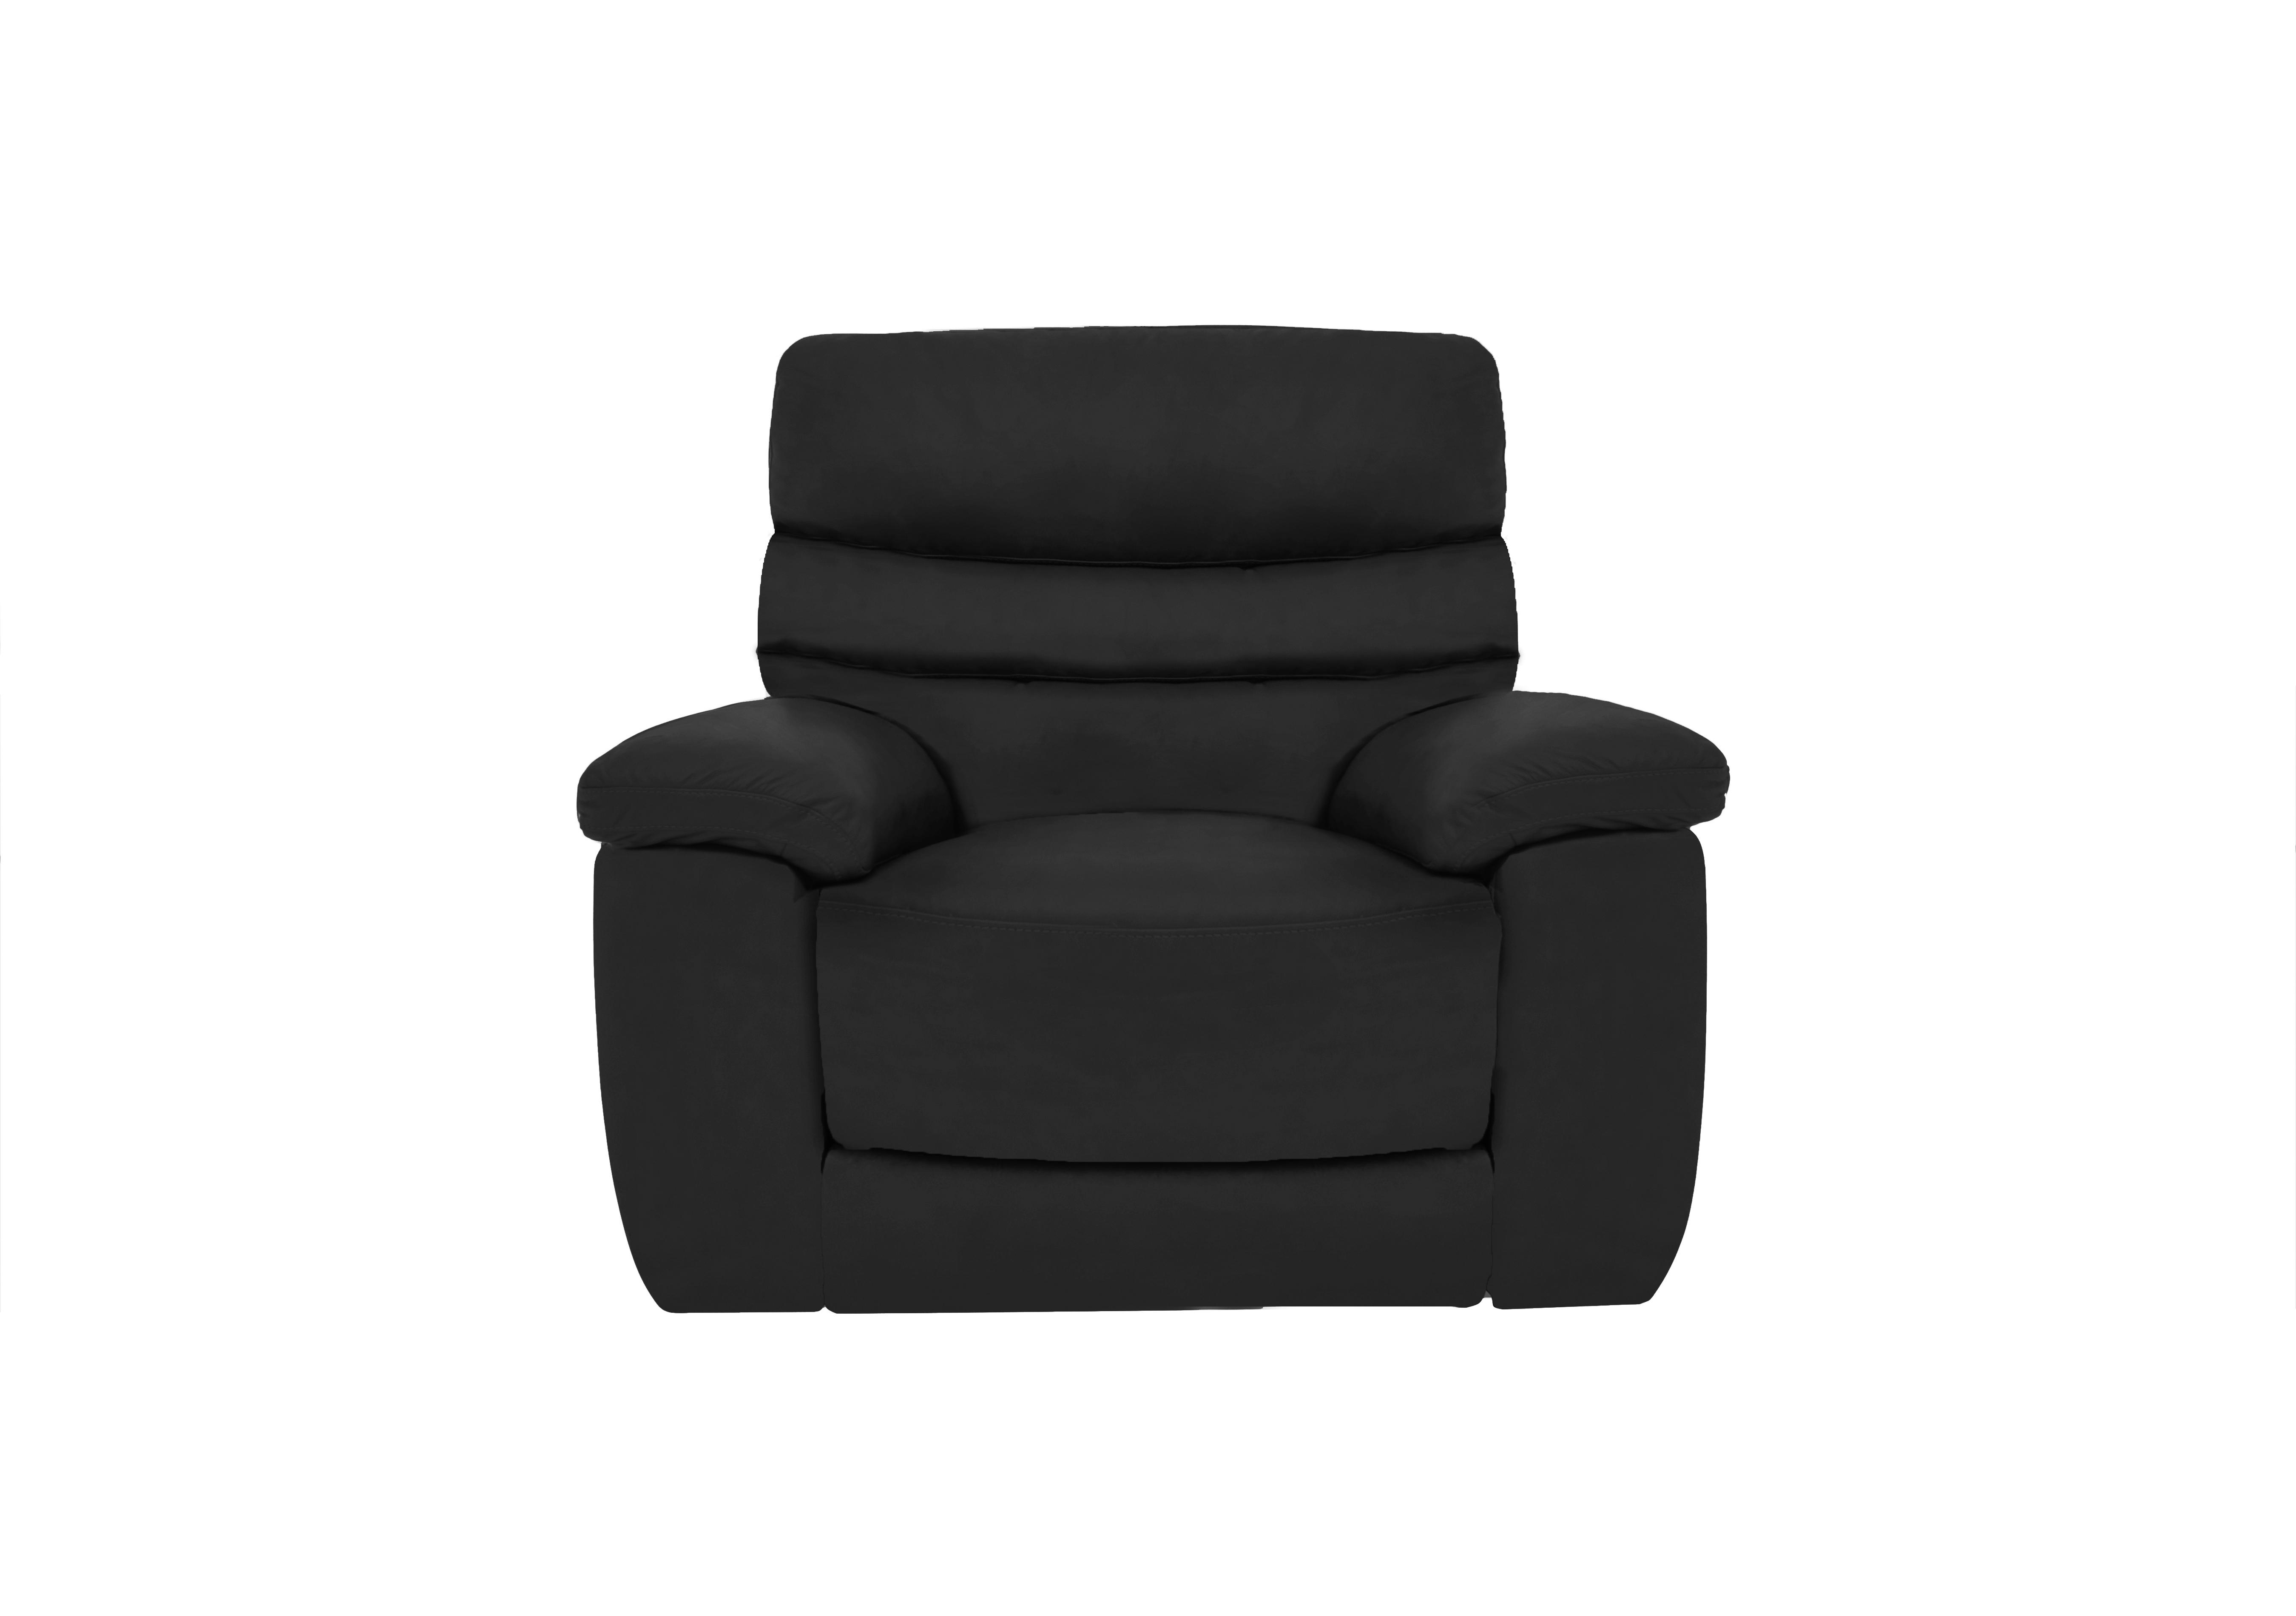 Nimbus Leather Power Recliner Chair with Power Headrest in Bx-023c Black on Furniture Village